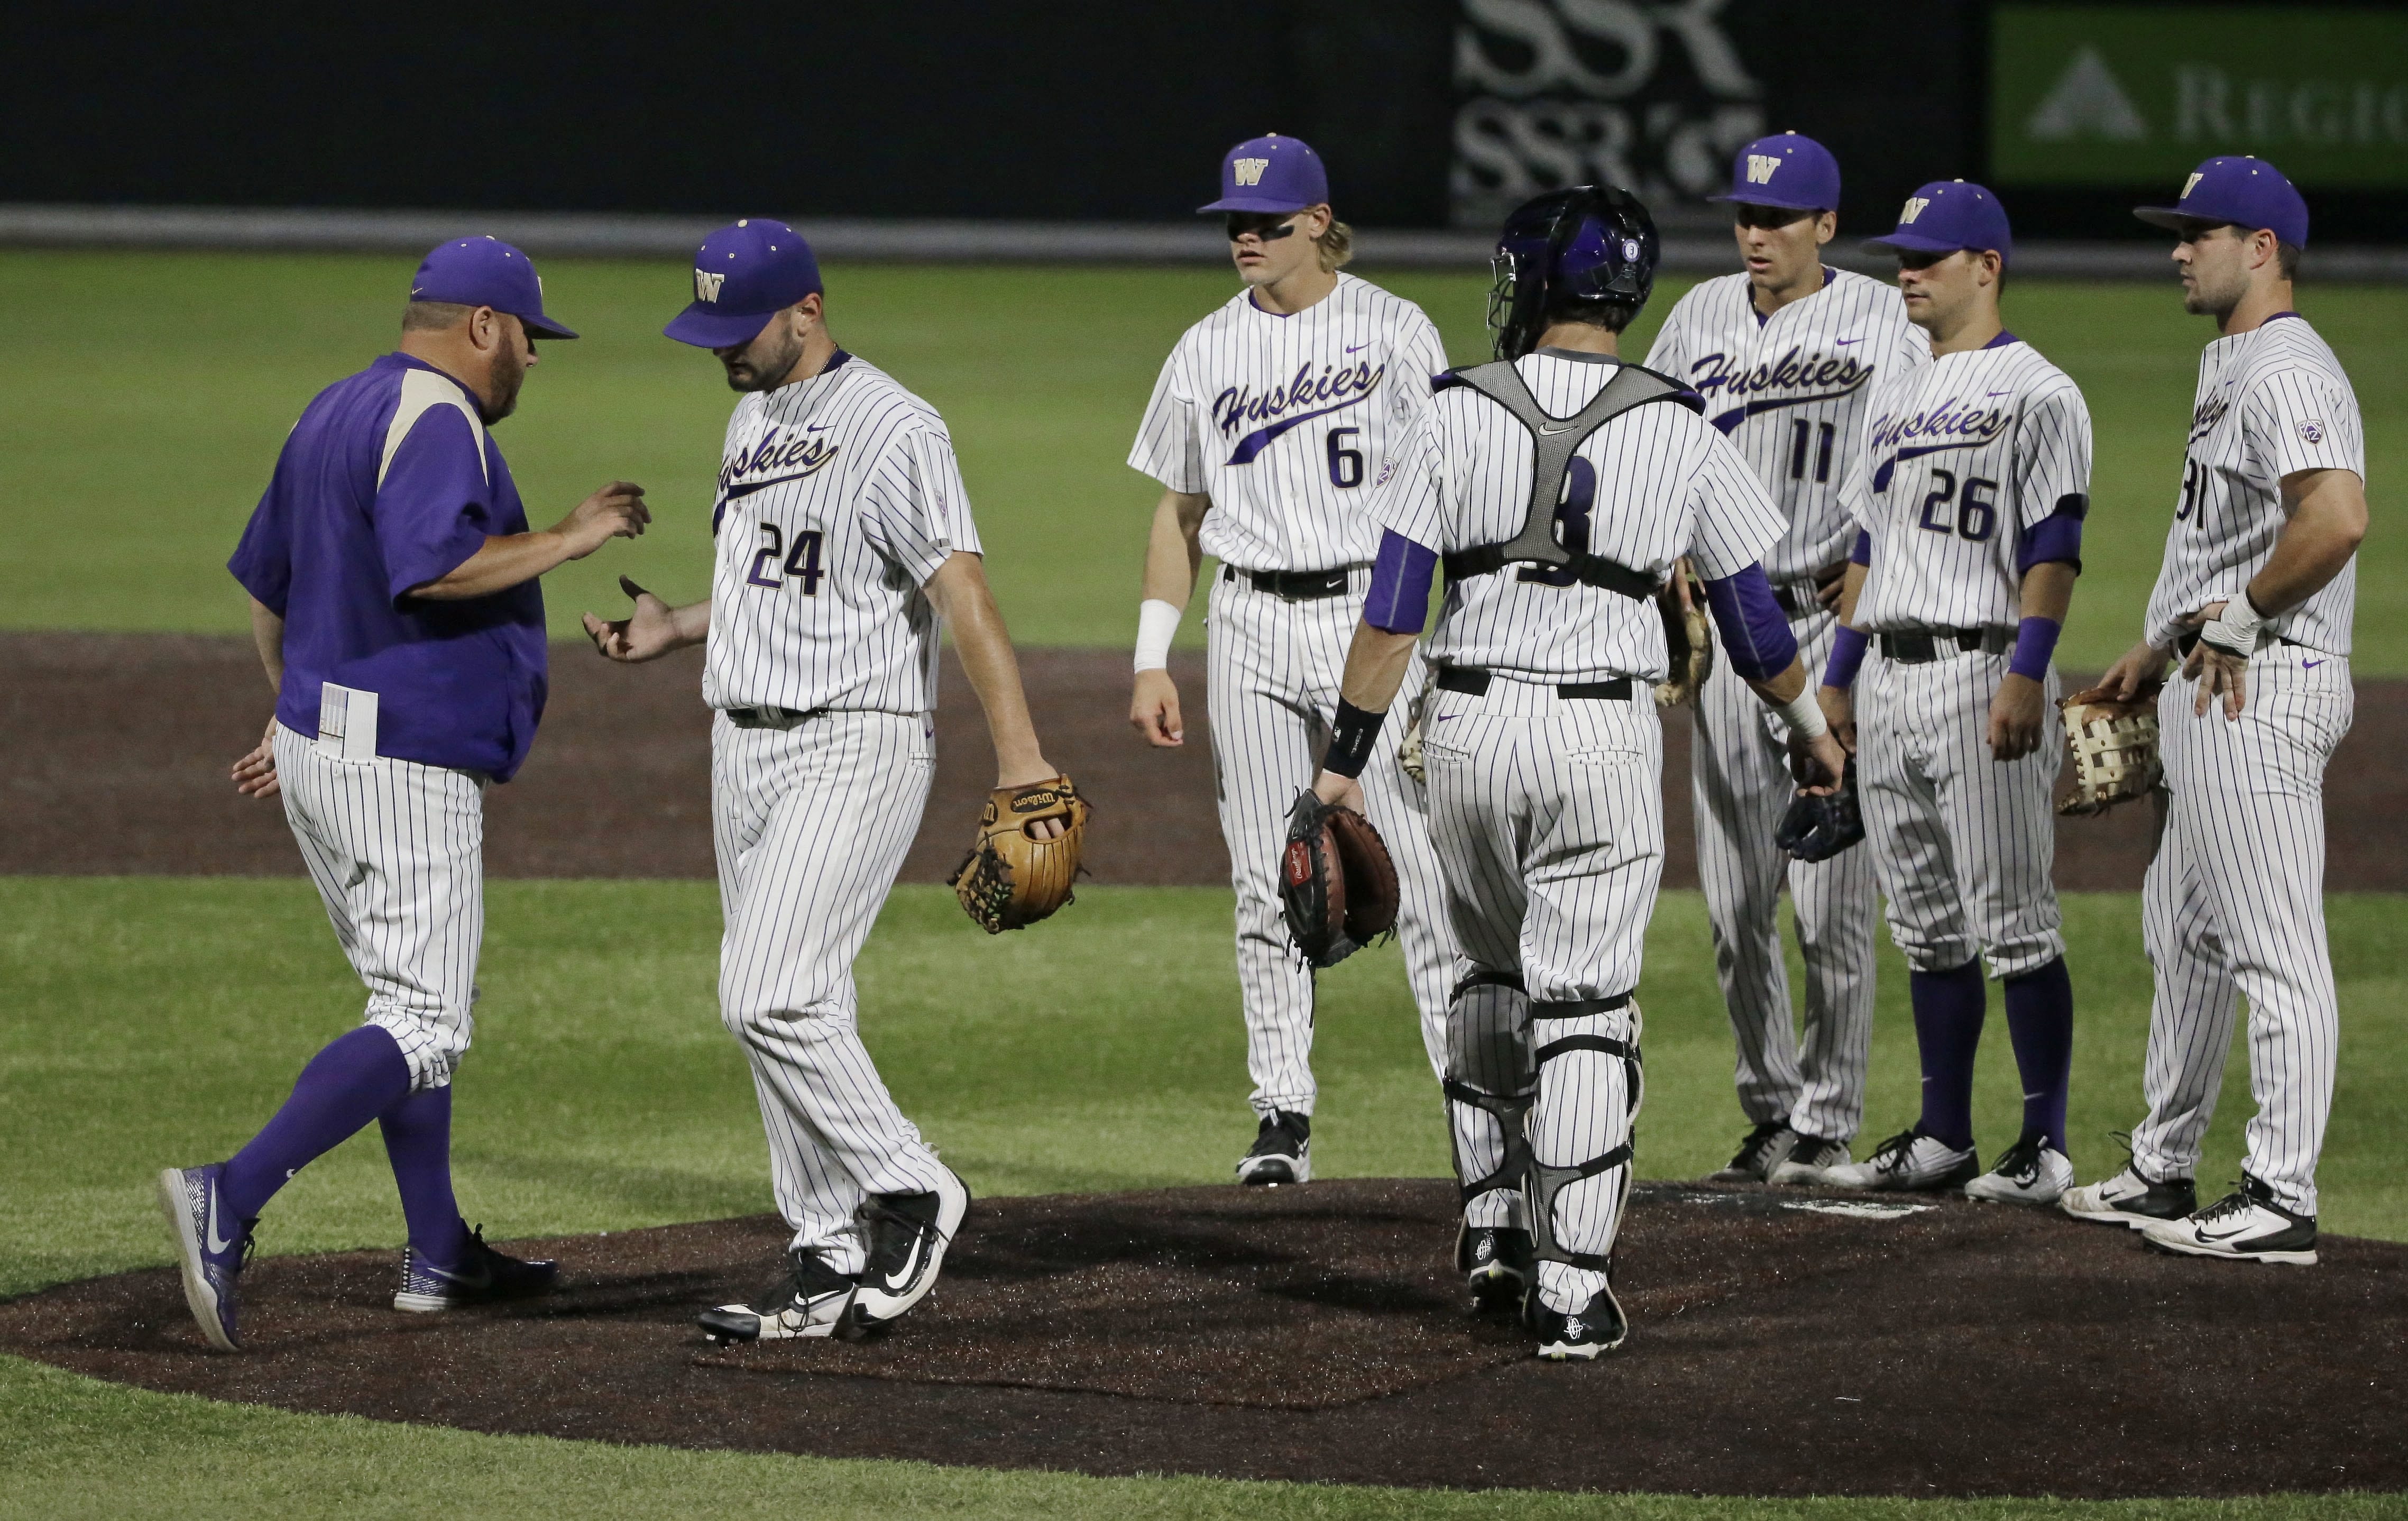 Washington starting pitcher Joe DeMers (24) is taken out of the game in the second inning of an NCAA college baseball regional tournament game against Xavier Sunday, June 5, 2016, in Nashville, Tenn. DeMers gave up six runs in less than two innings.